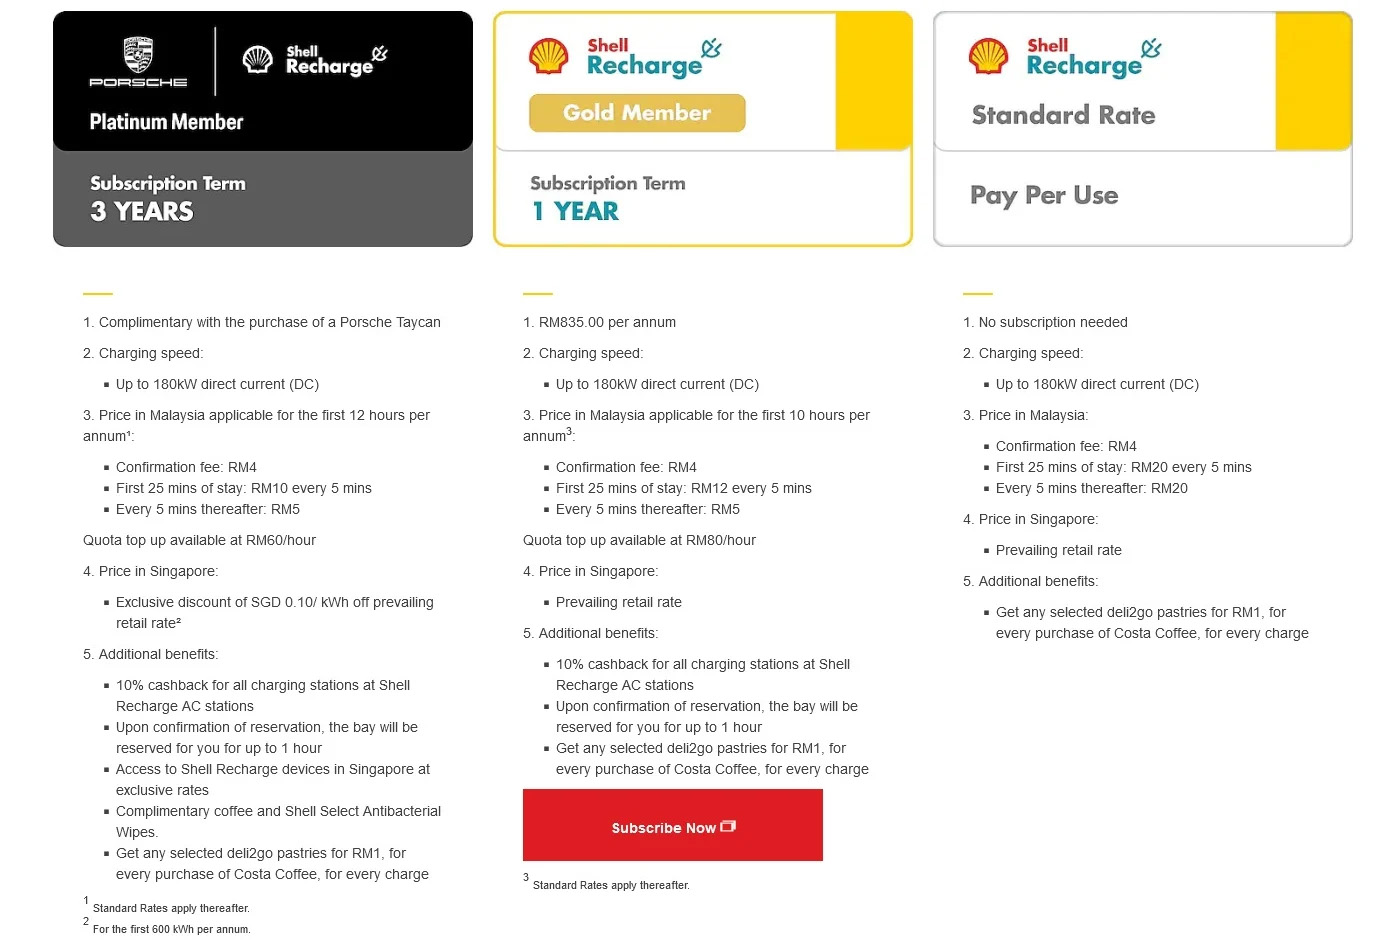 Shell Recharge rates